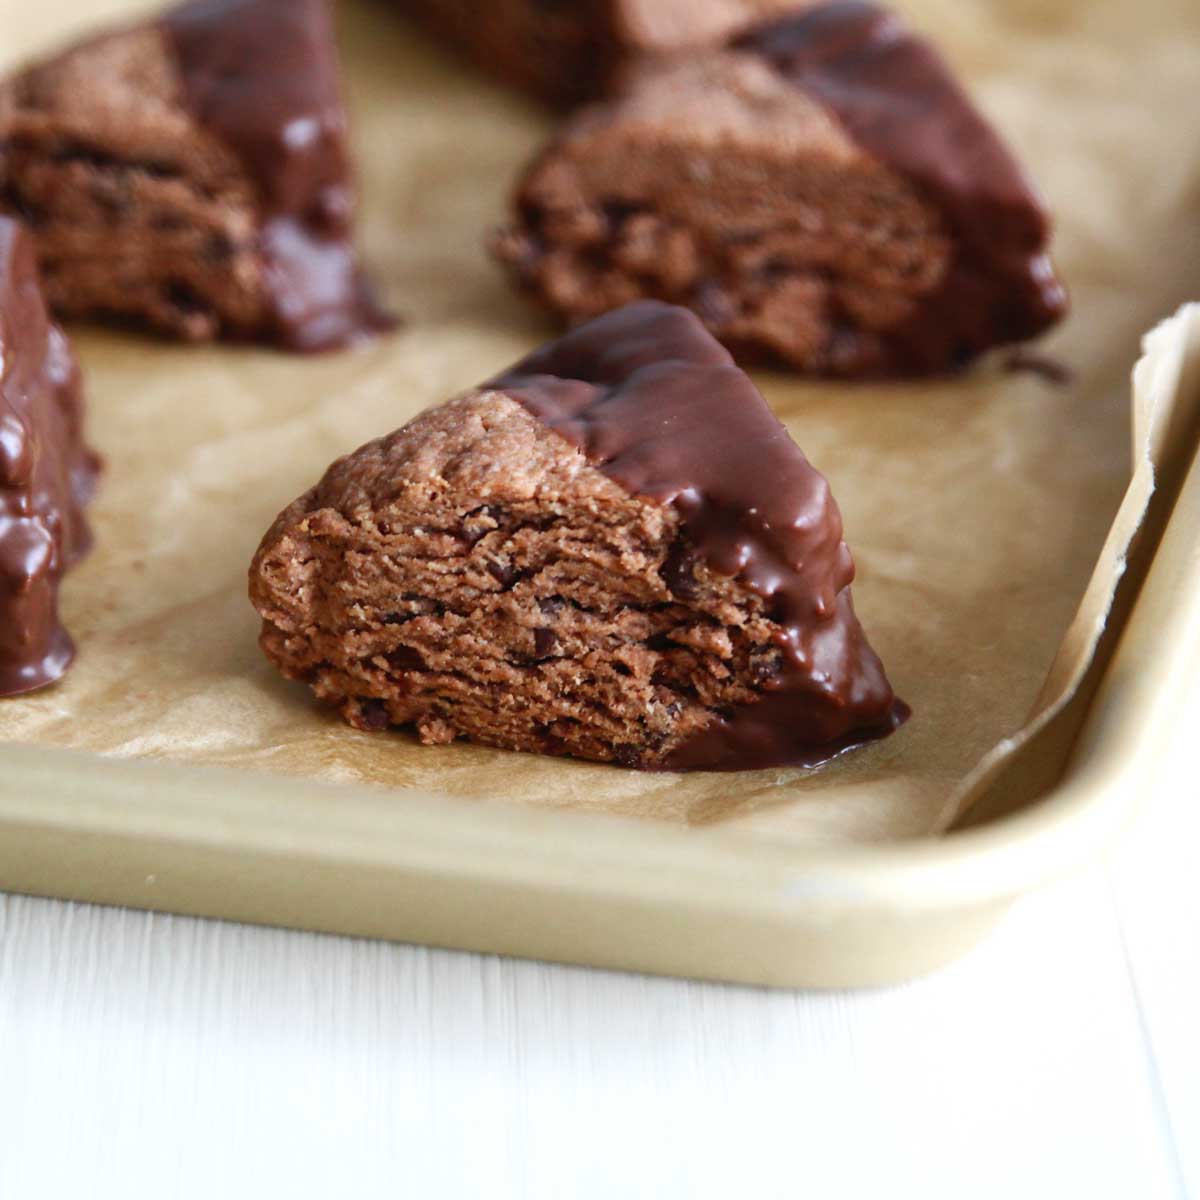 Vegan Double Chocolate Scones made with Coconut Oil
